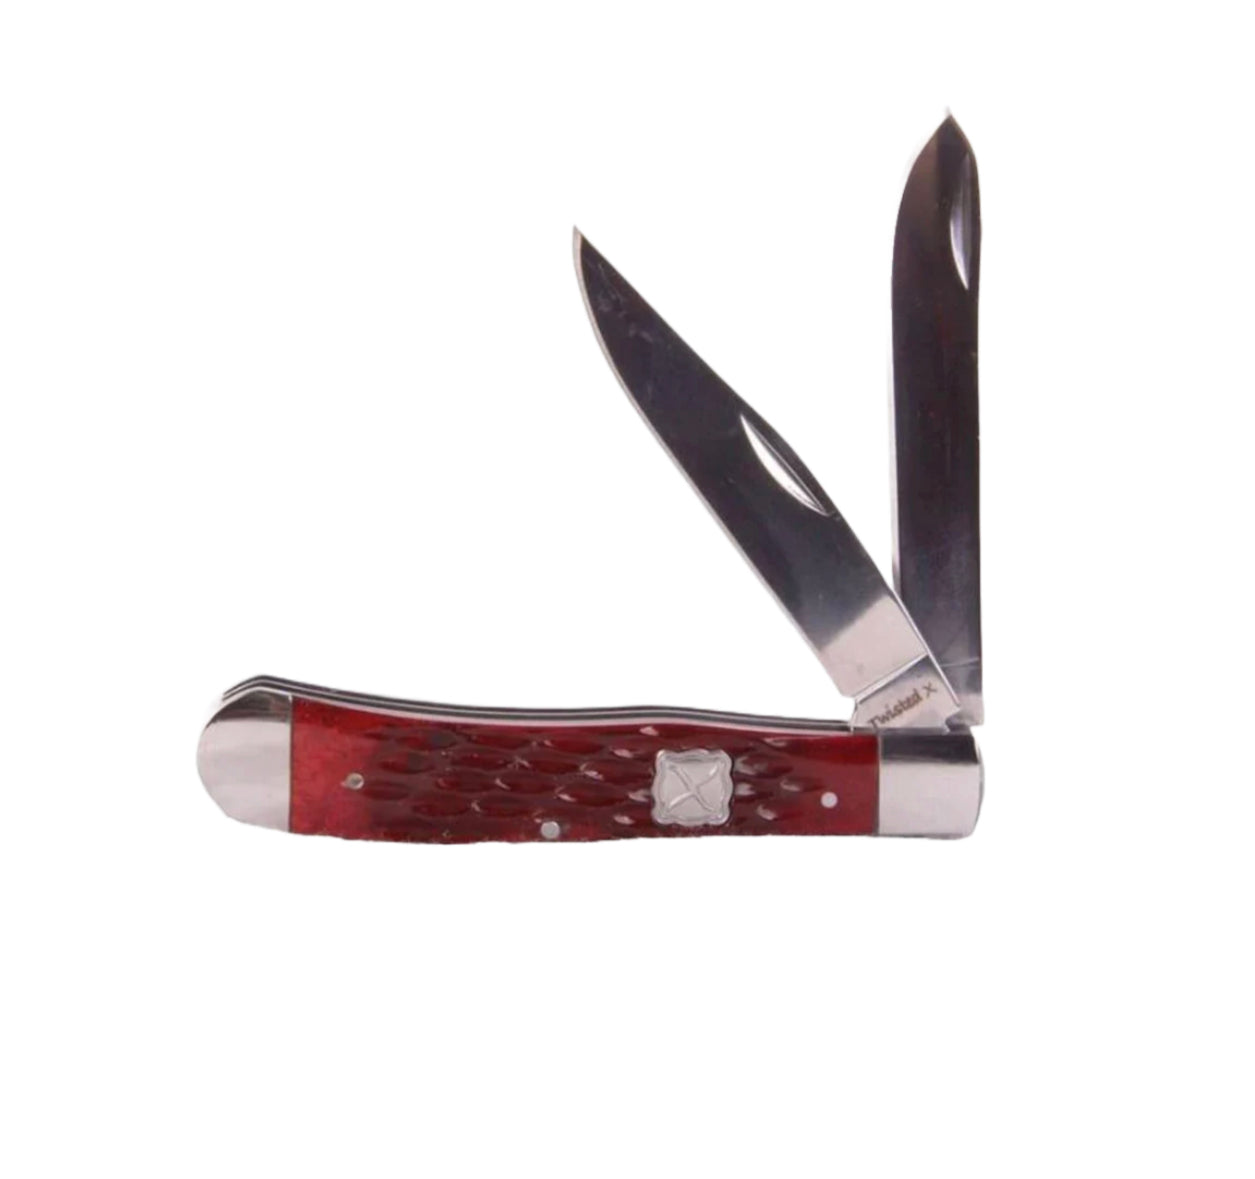 TWISTED X ROOTBEER HANDLE TWO BLADE FOLDING KNIFE